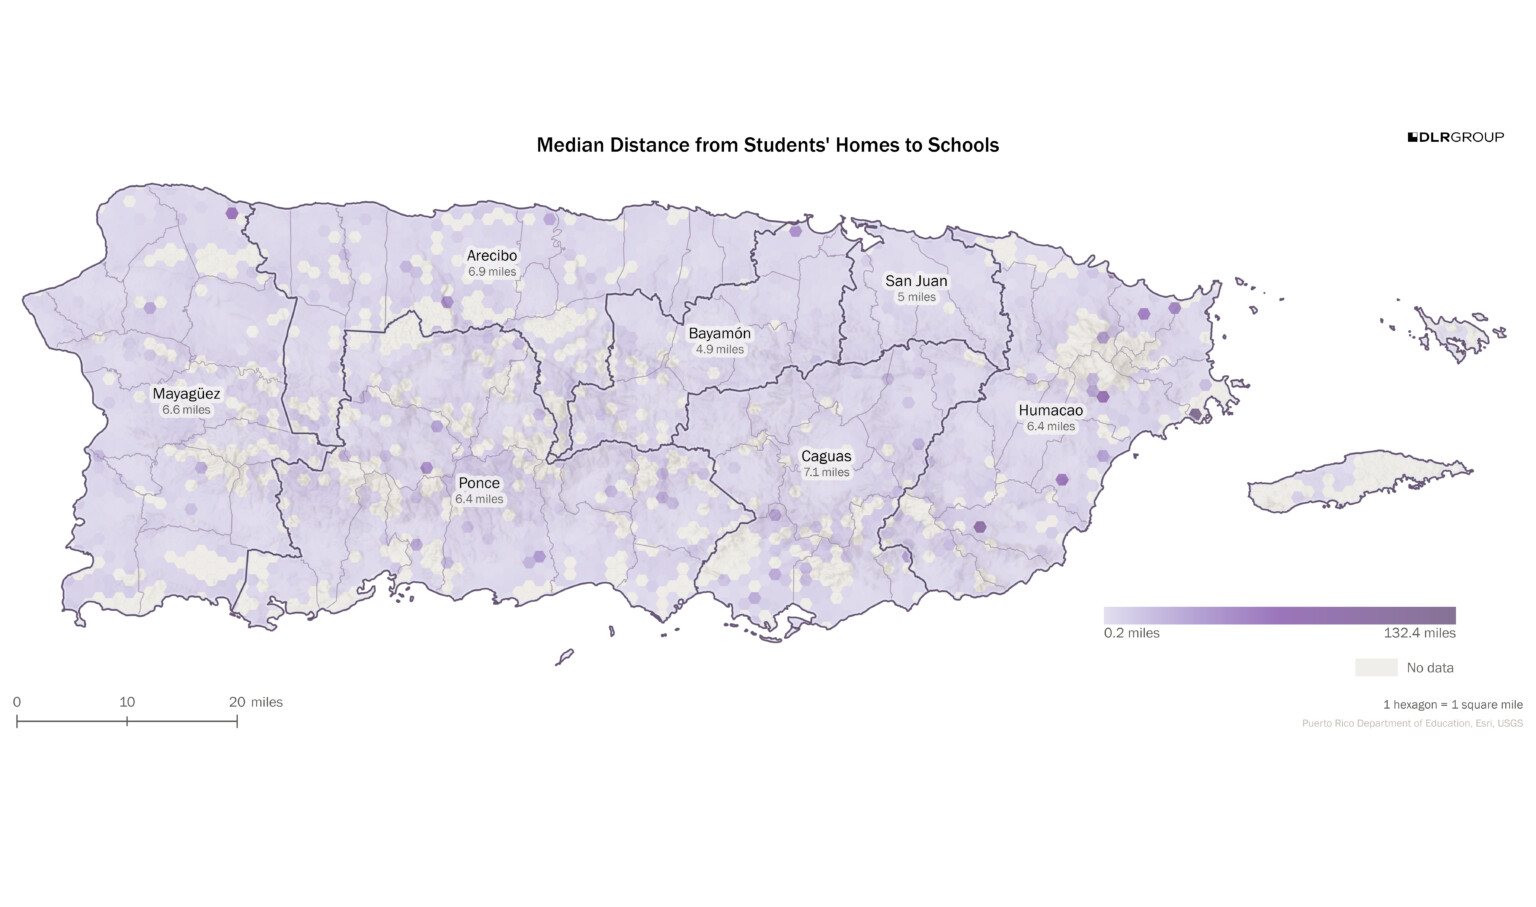 Heatmap of Puerto Rico showing the median distance of students homes to schools